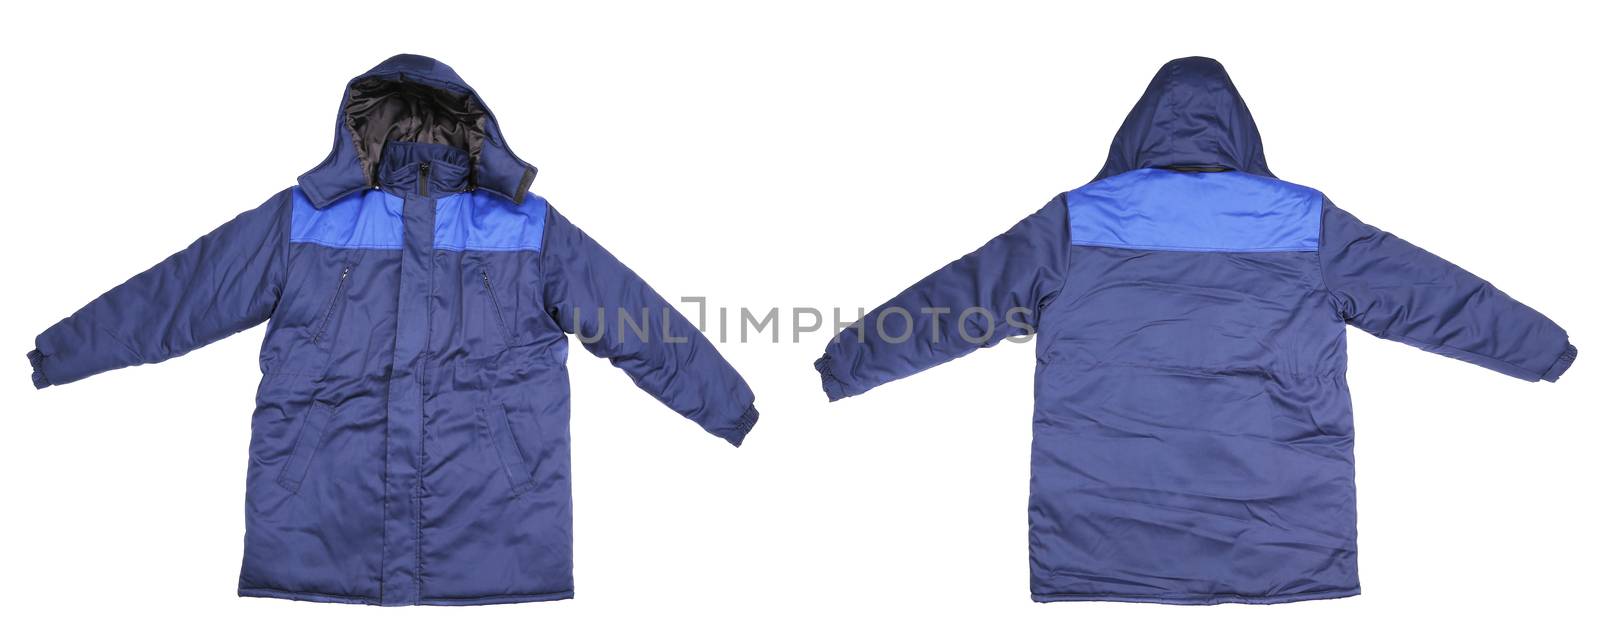 Winter work wear. Isolated on white background.